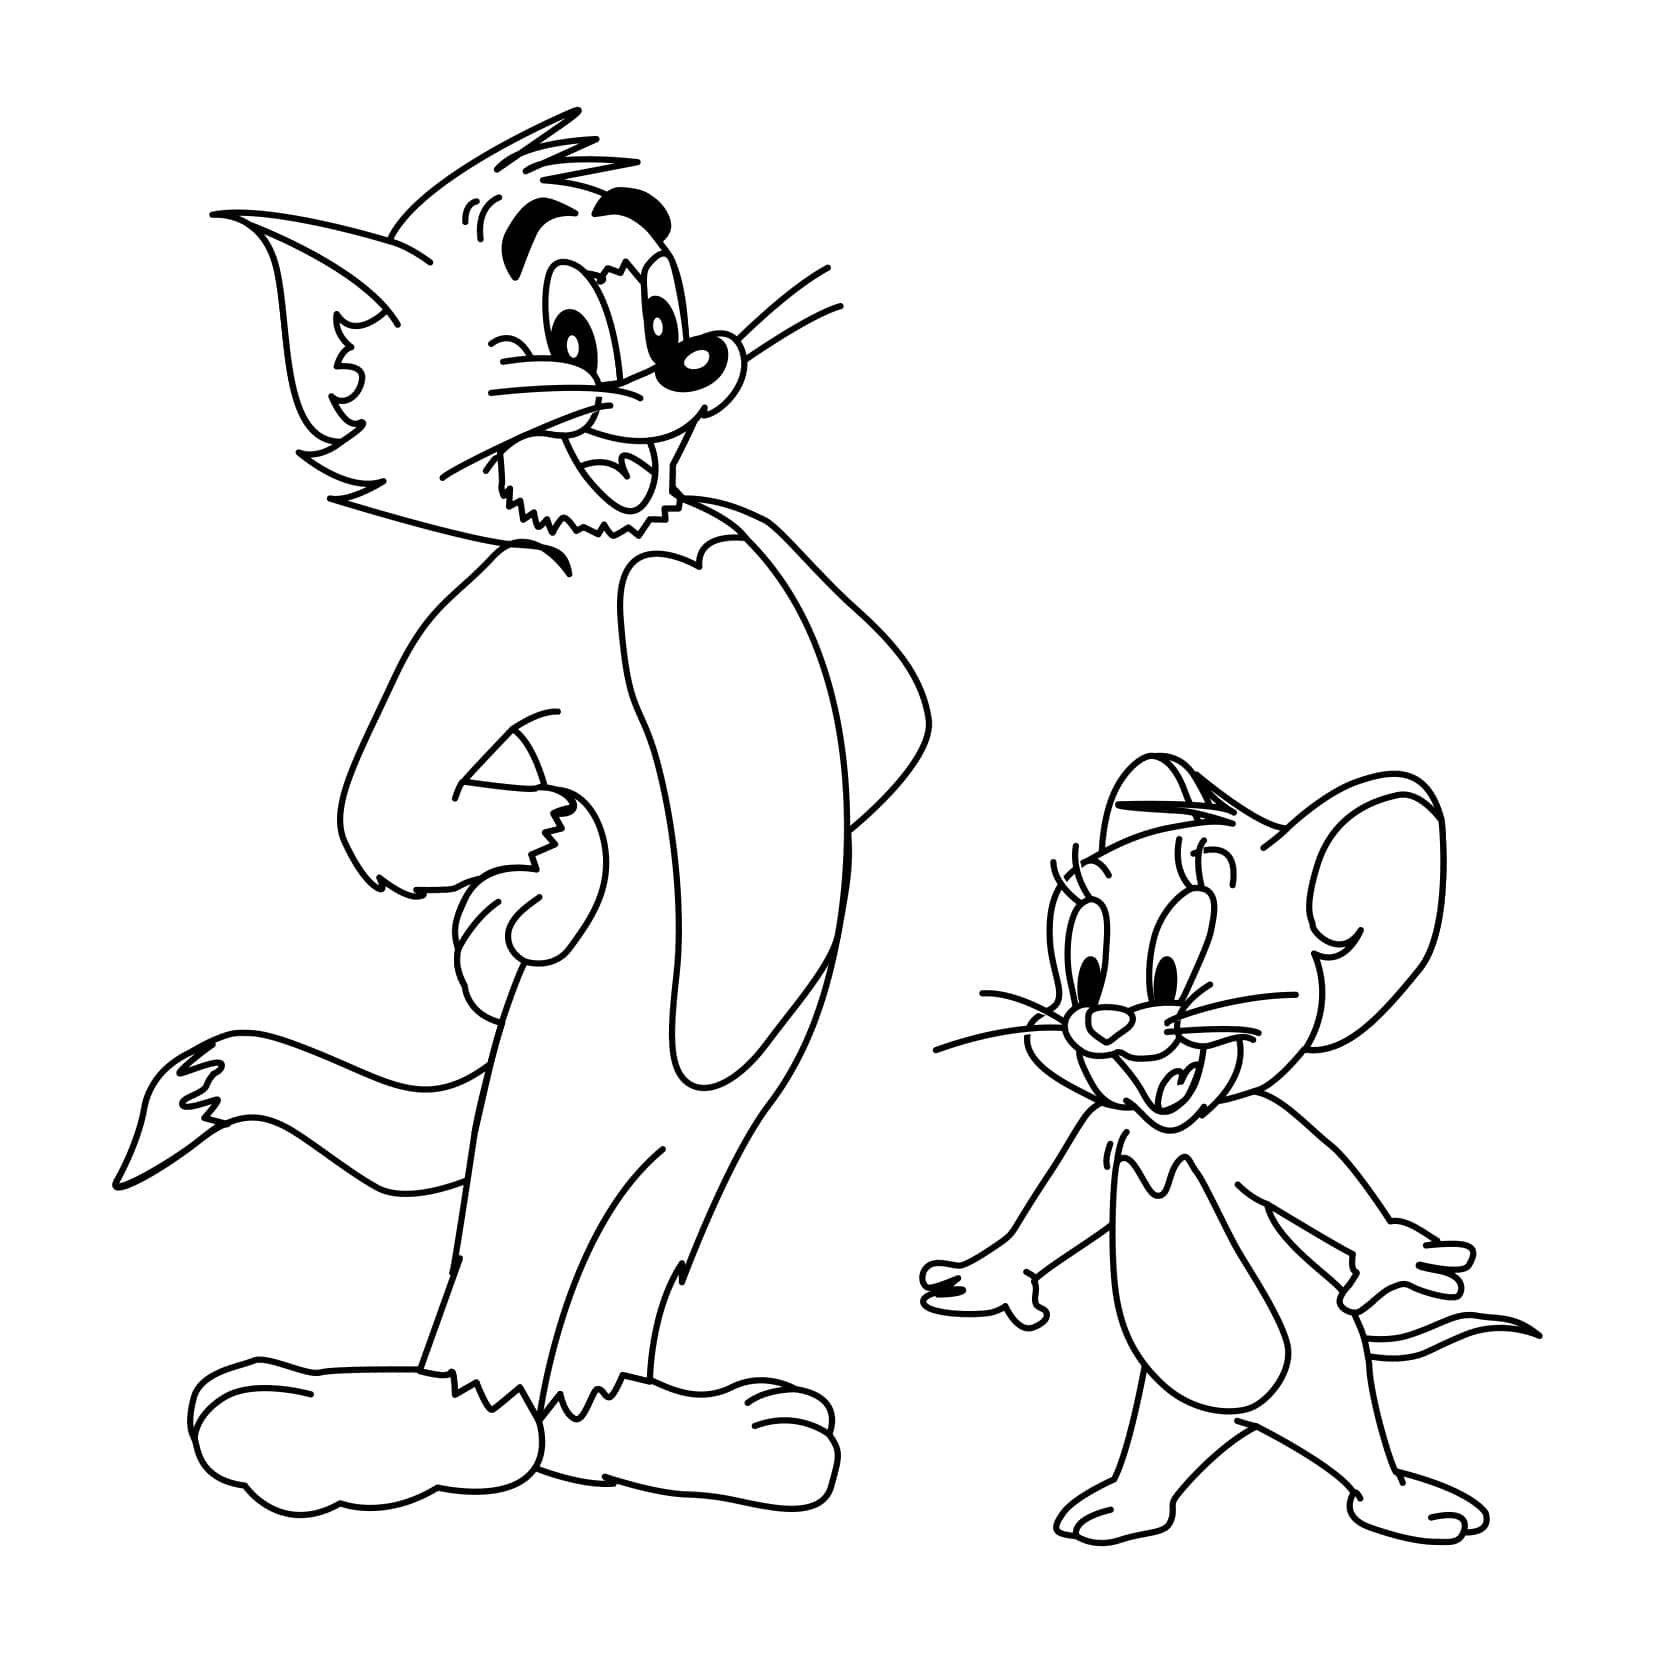 Tom and Jerry Coloring Pages 100 images Free Printable.